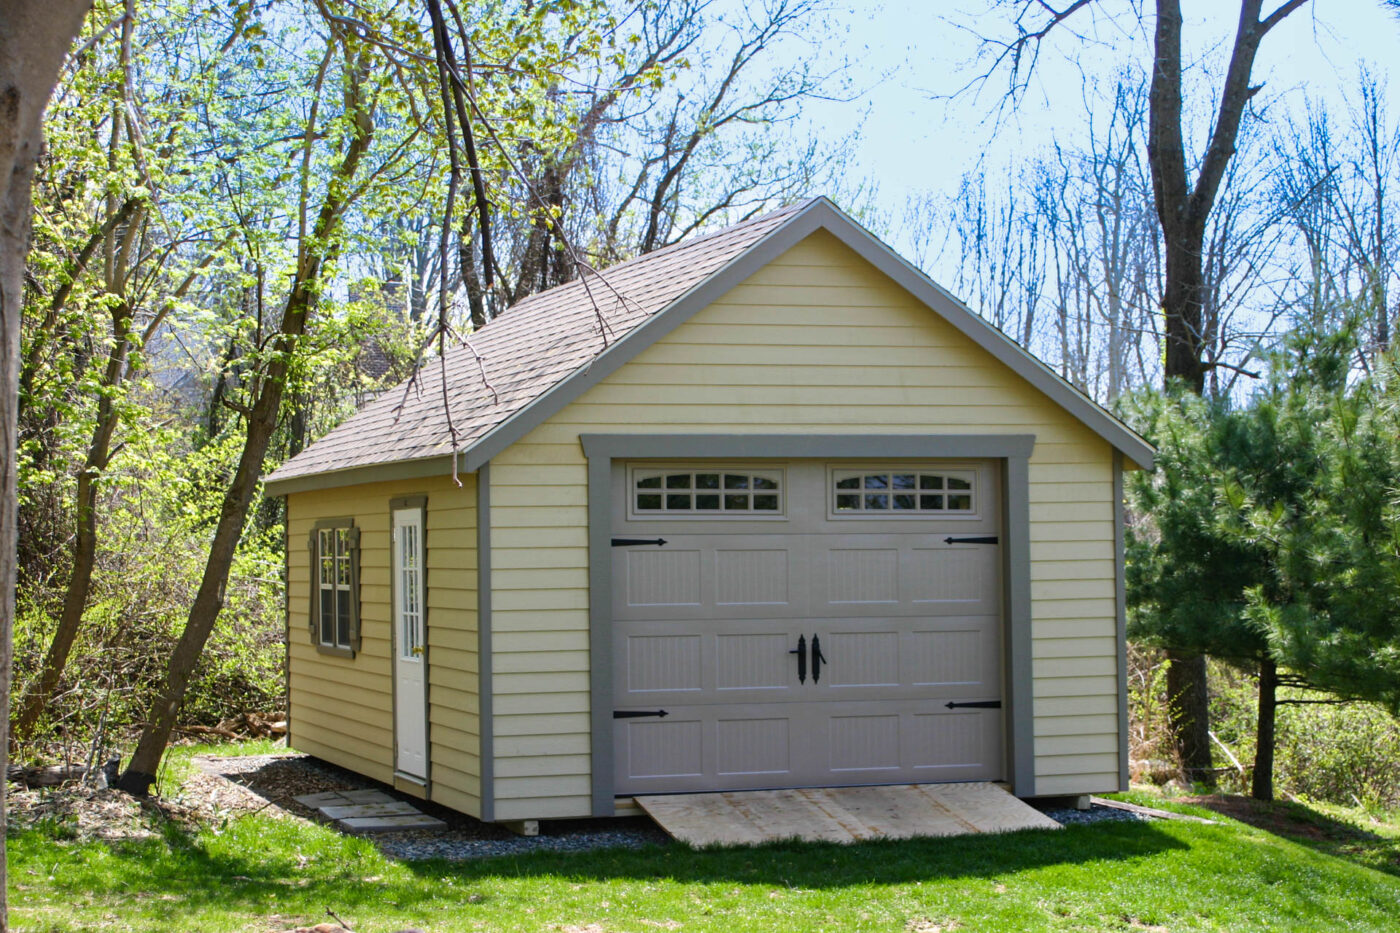 Single car garage for sale in NY 1